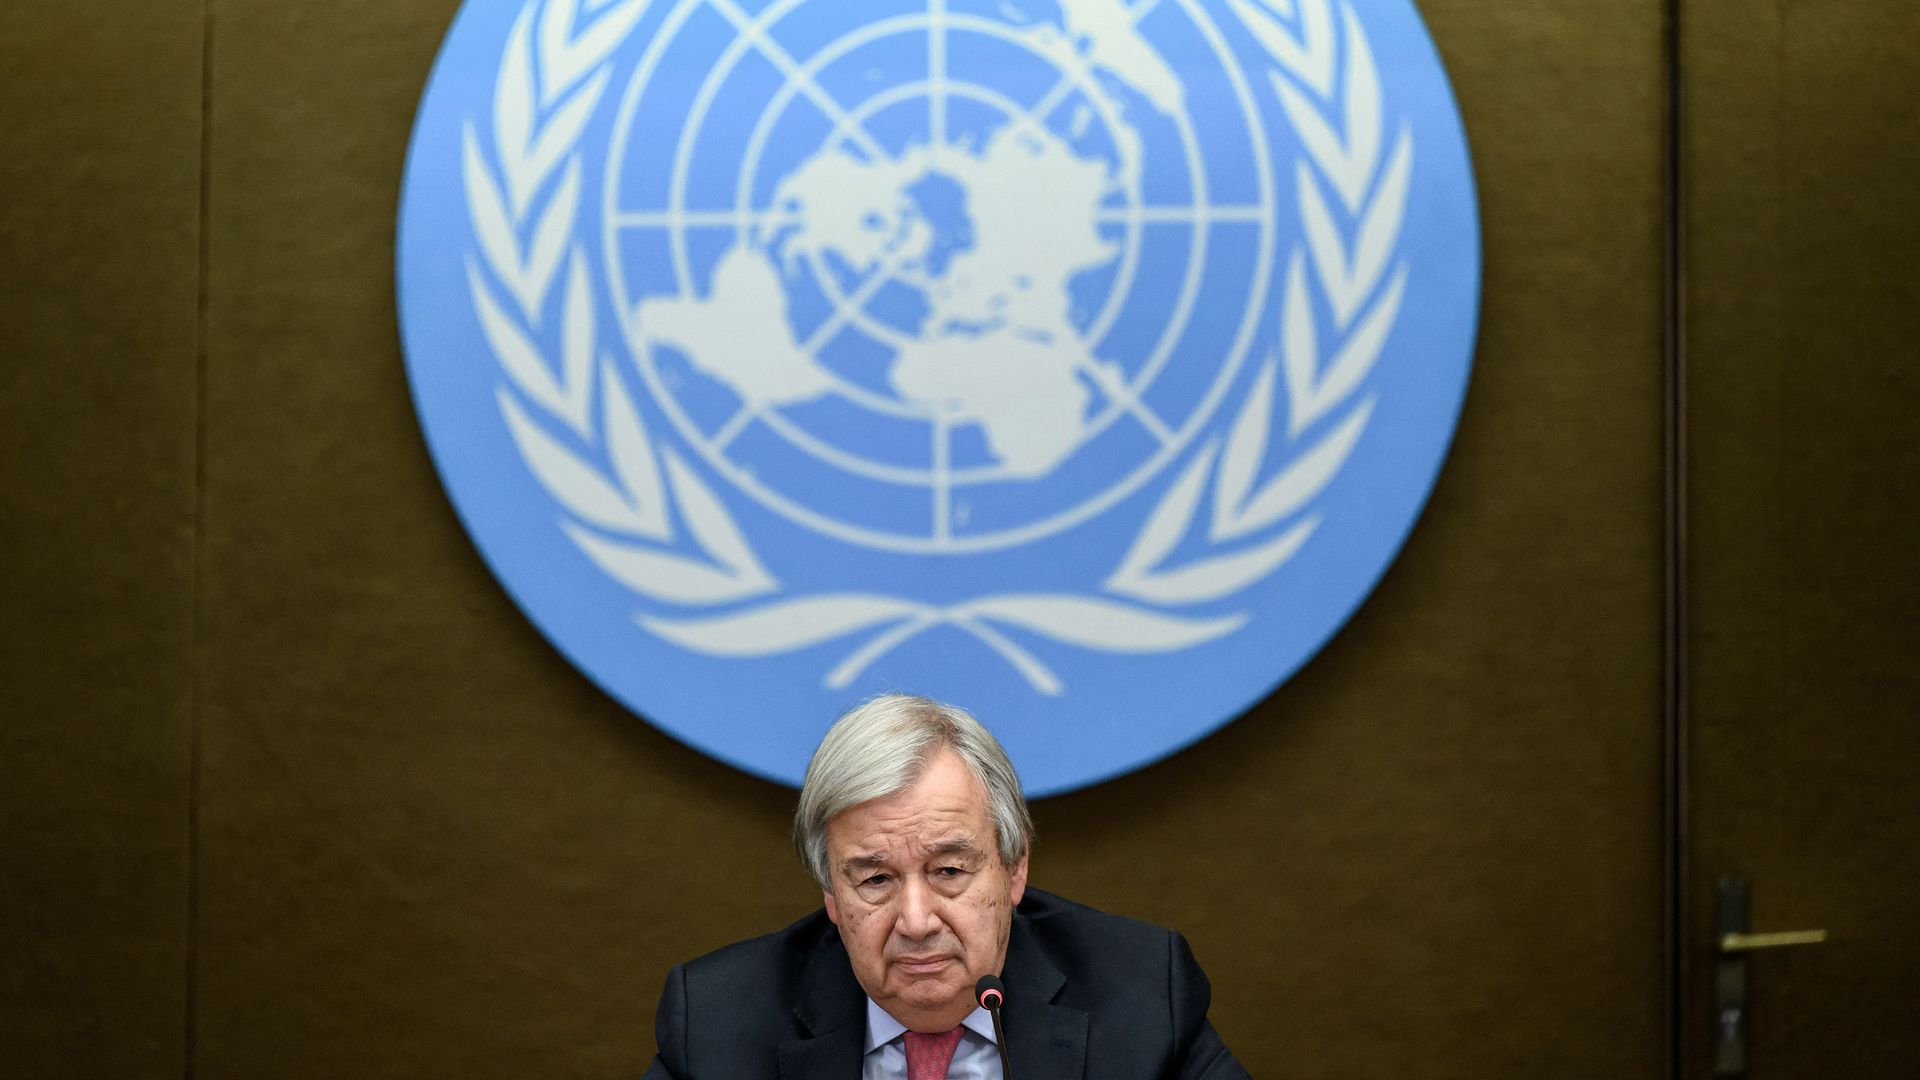 Photo of Antonio Guterres sitting with a giant plaque of the blue UN logo behind him